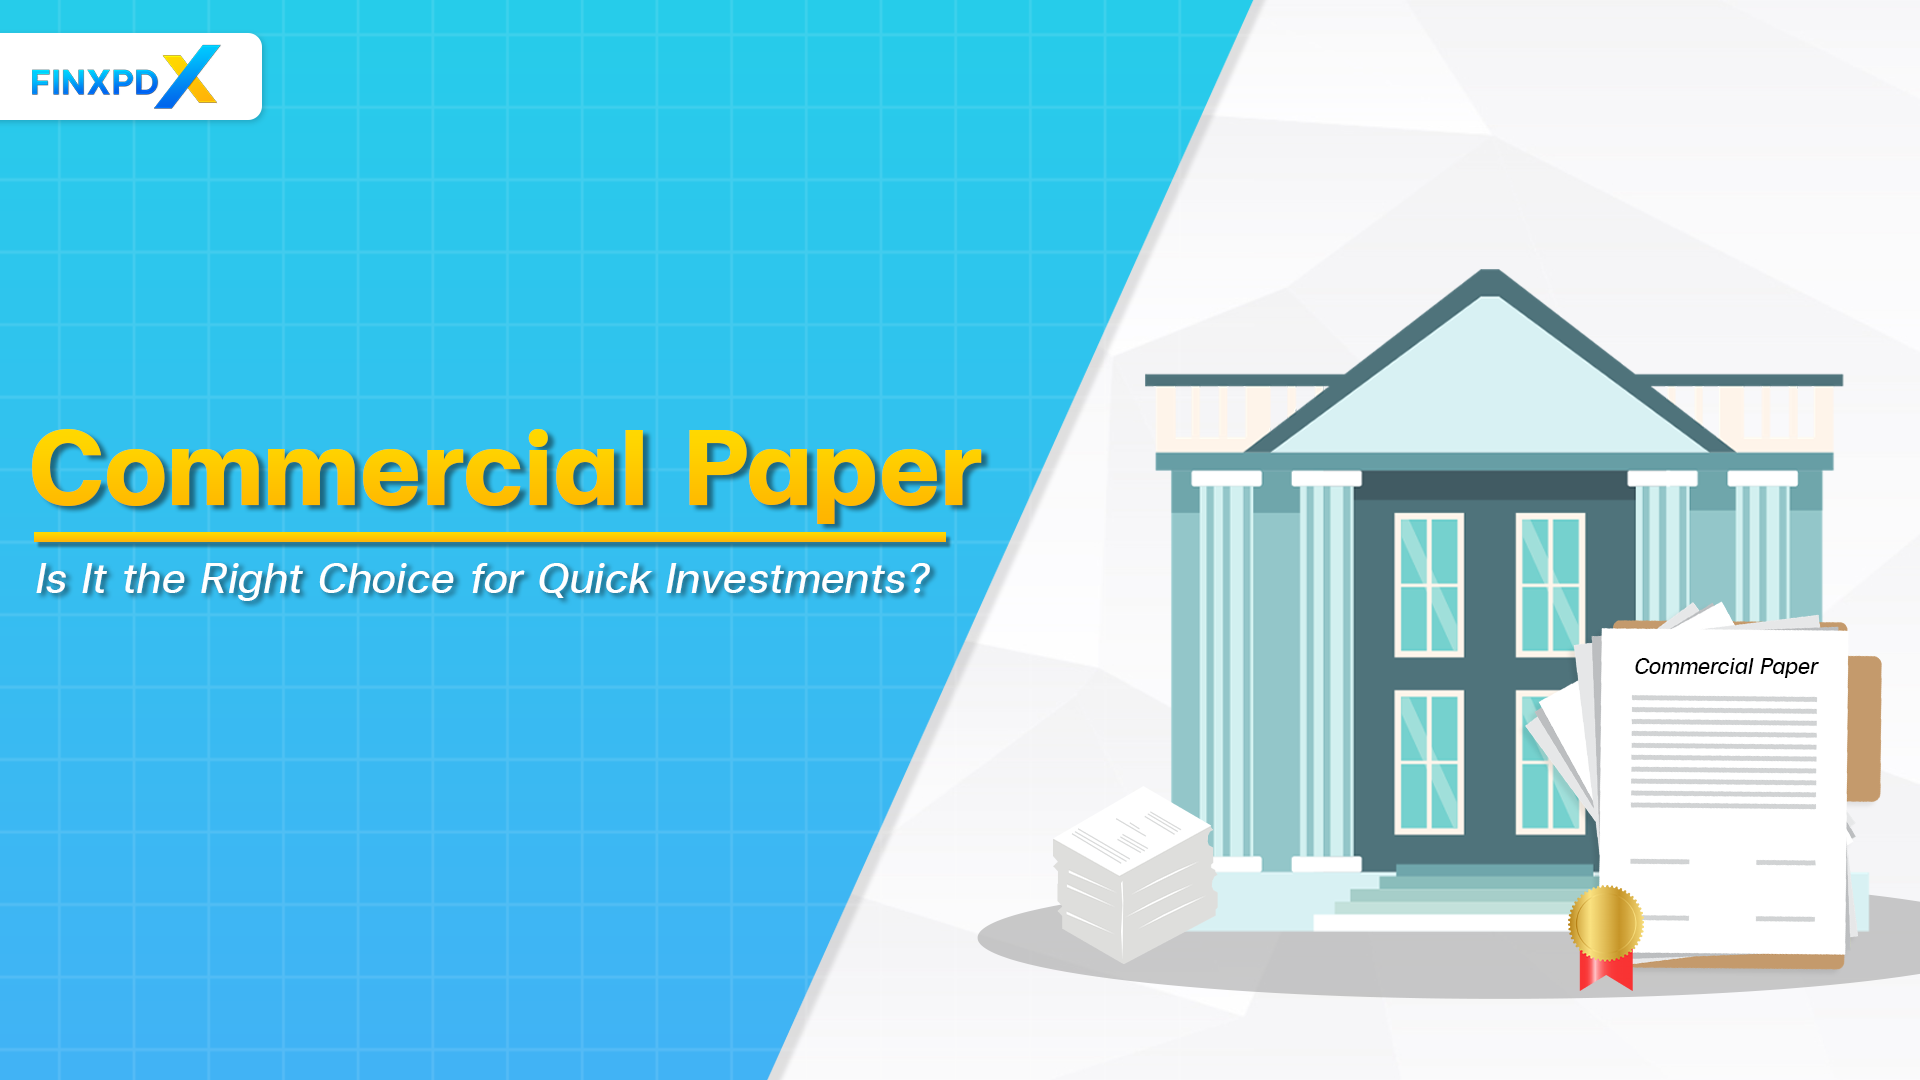 Commercial paper